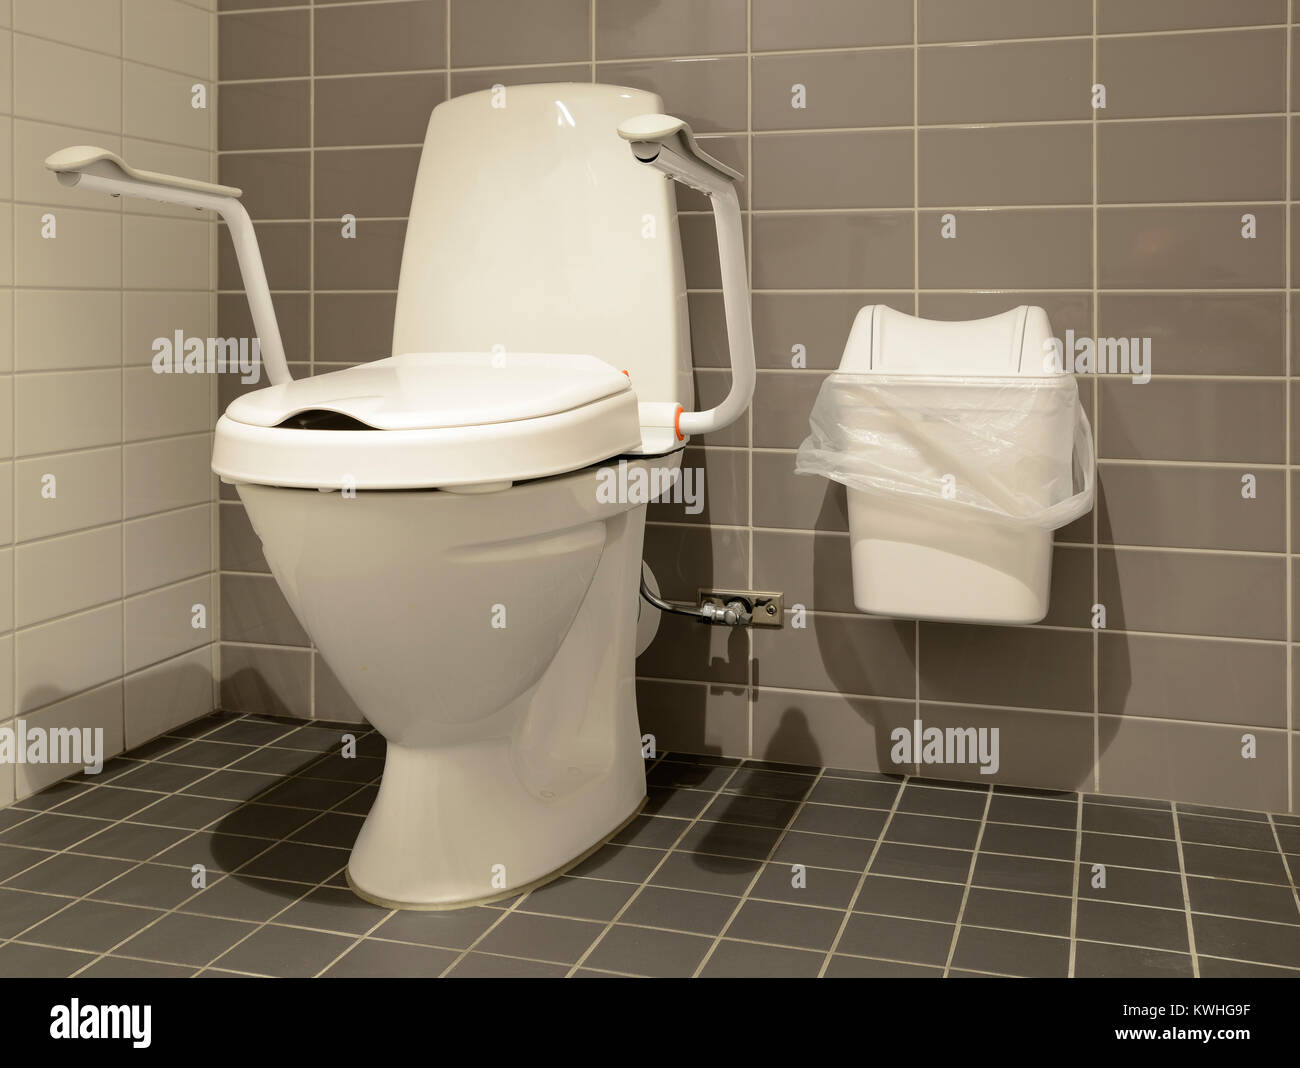 Toilet for people with disabilities Stock Photo